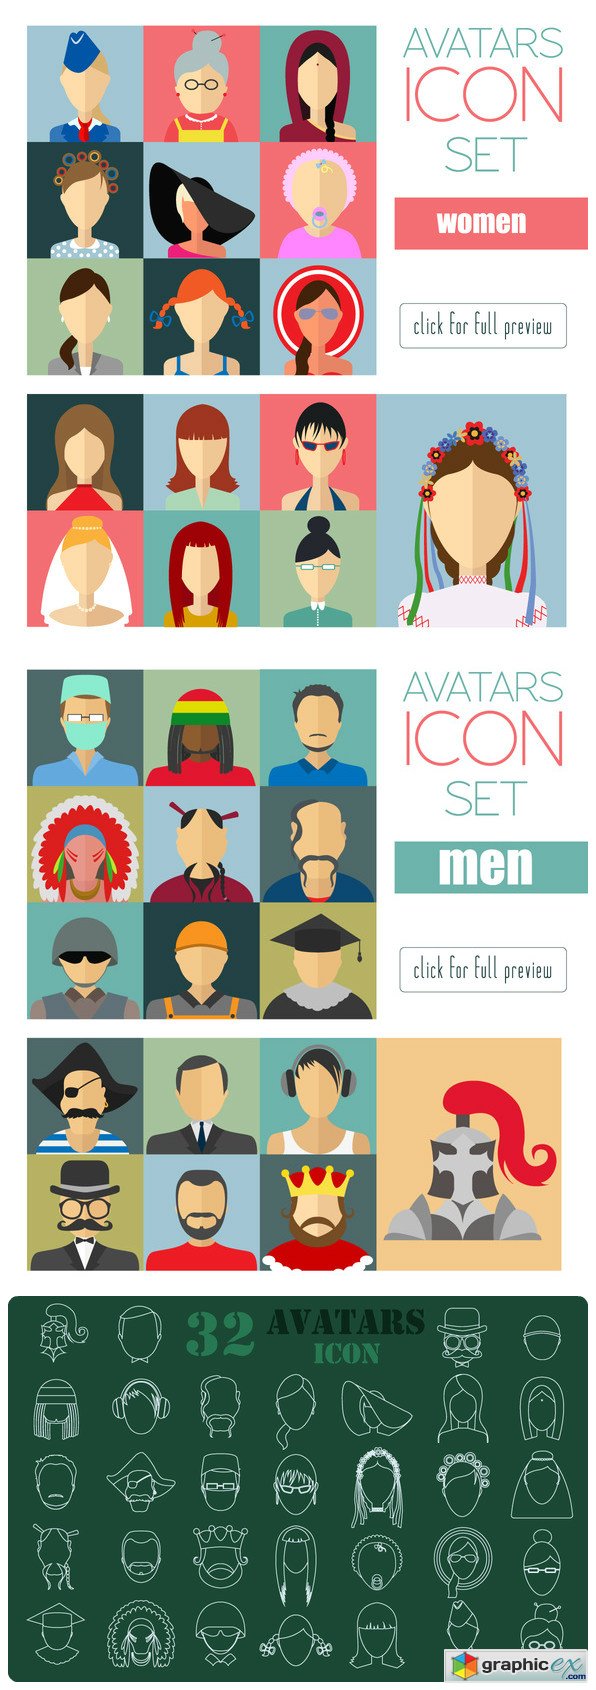 Avatar icon set People characters